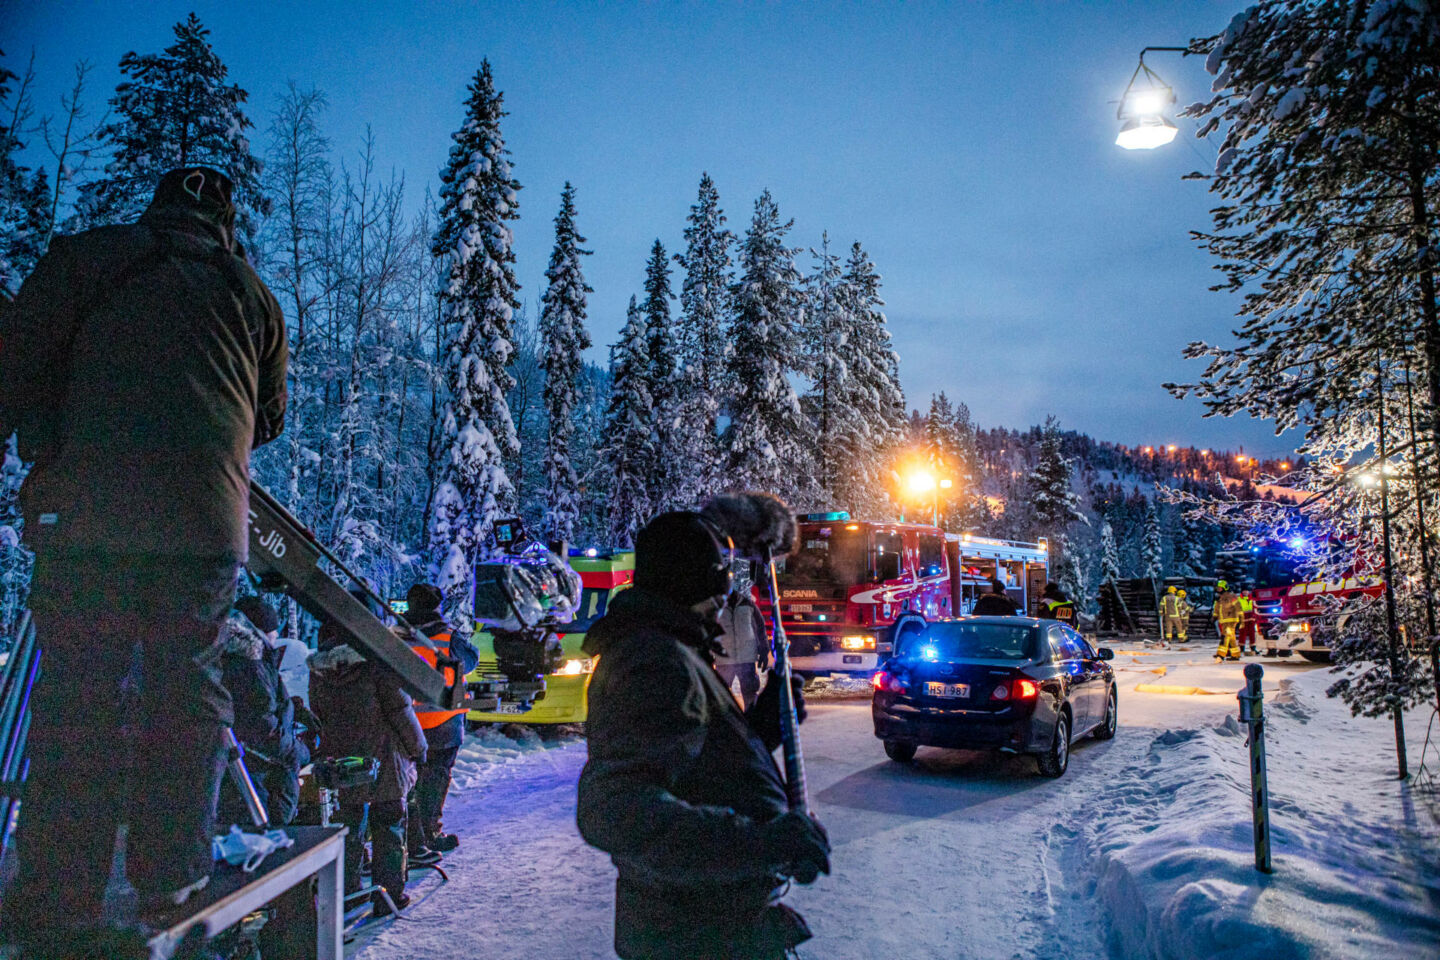 Production services for Arctic Circle, filmed in Finnish Lapland